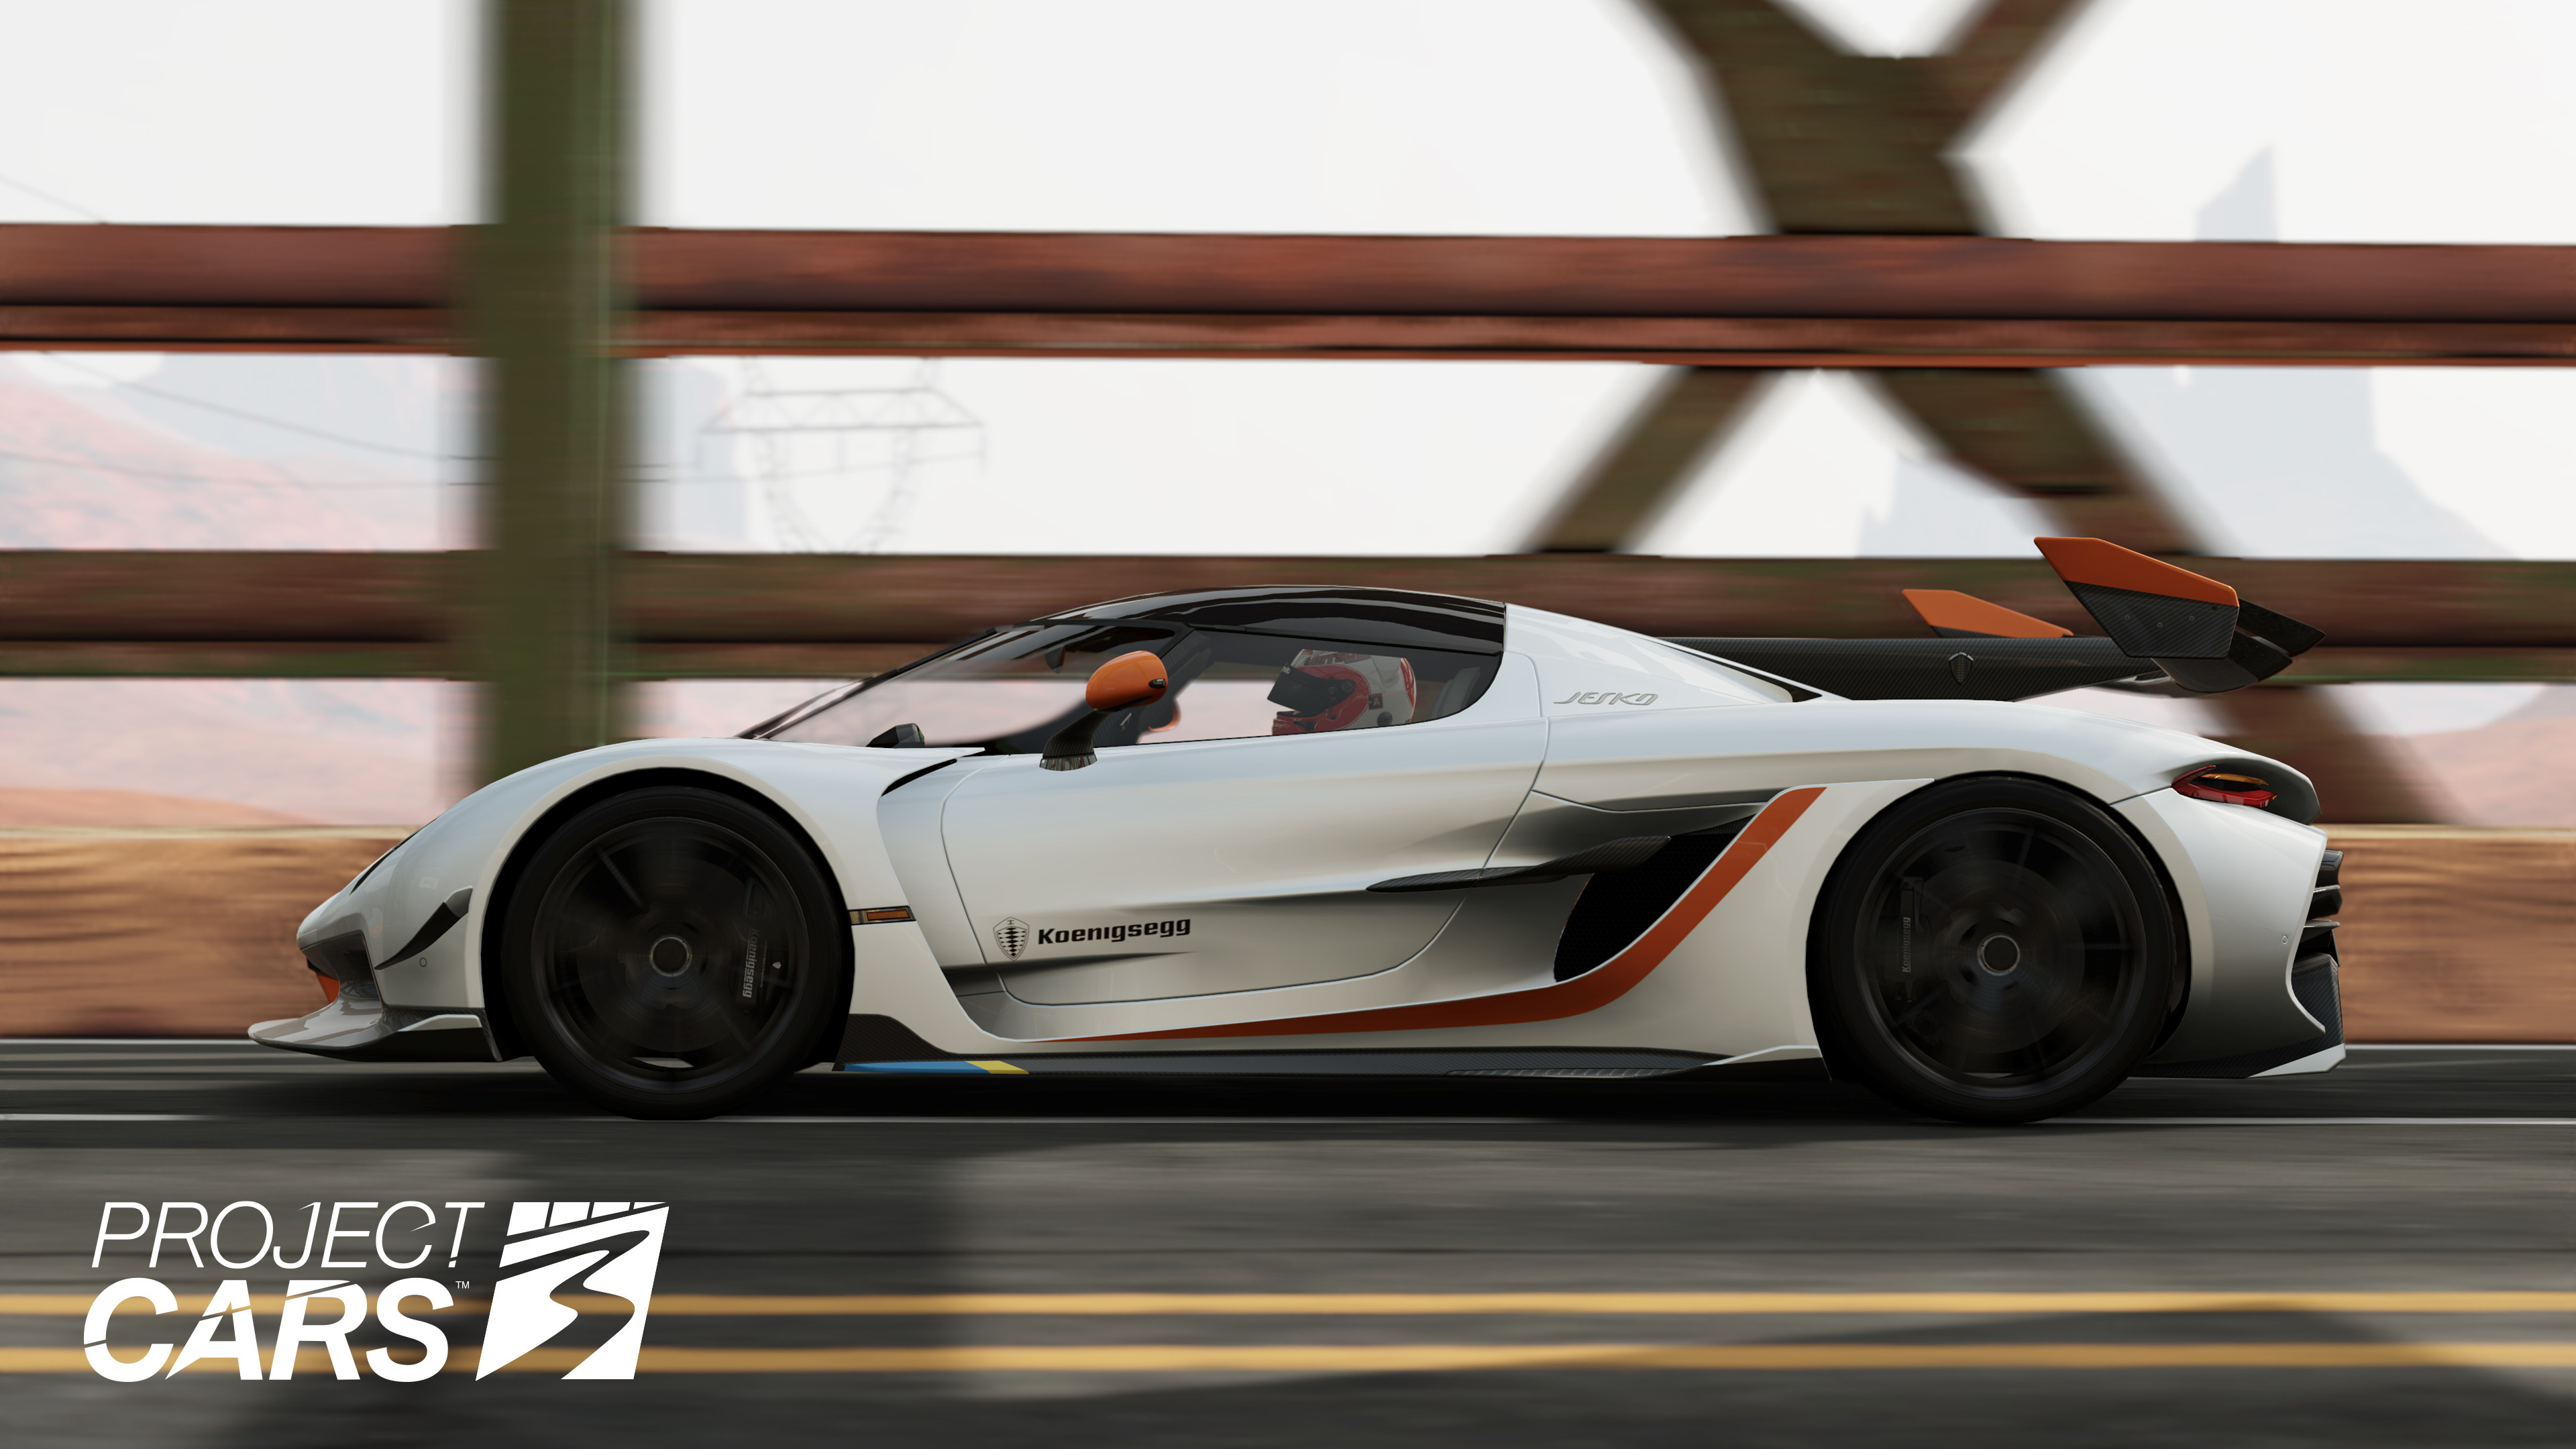 Video Game Project Cars 3 HD Wallpaper | Background Image